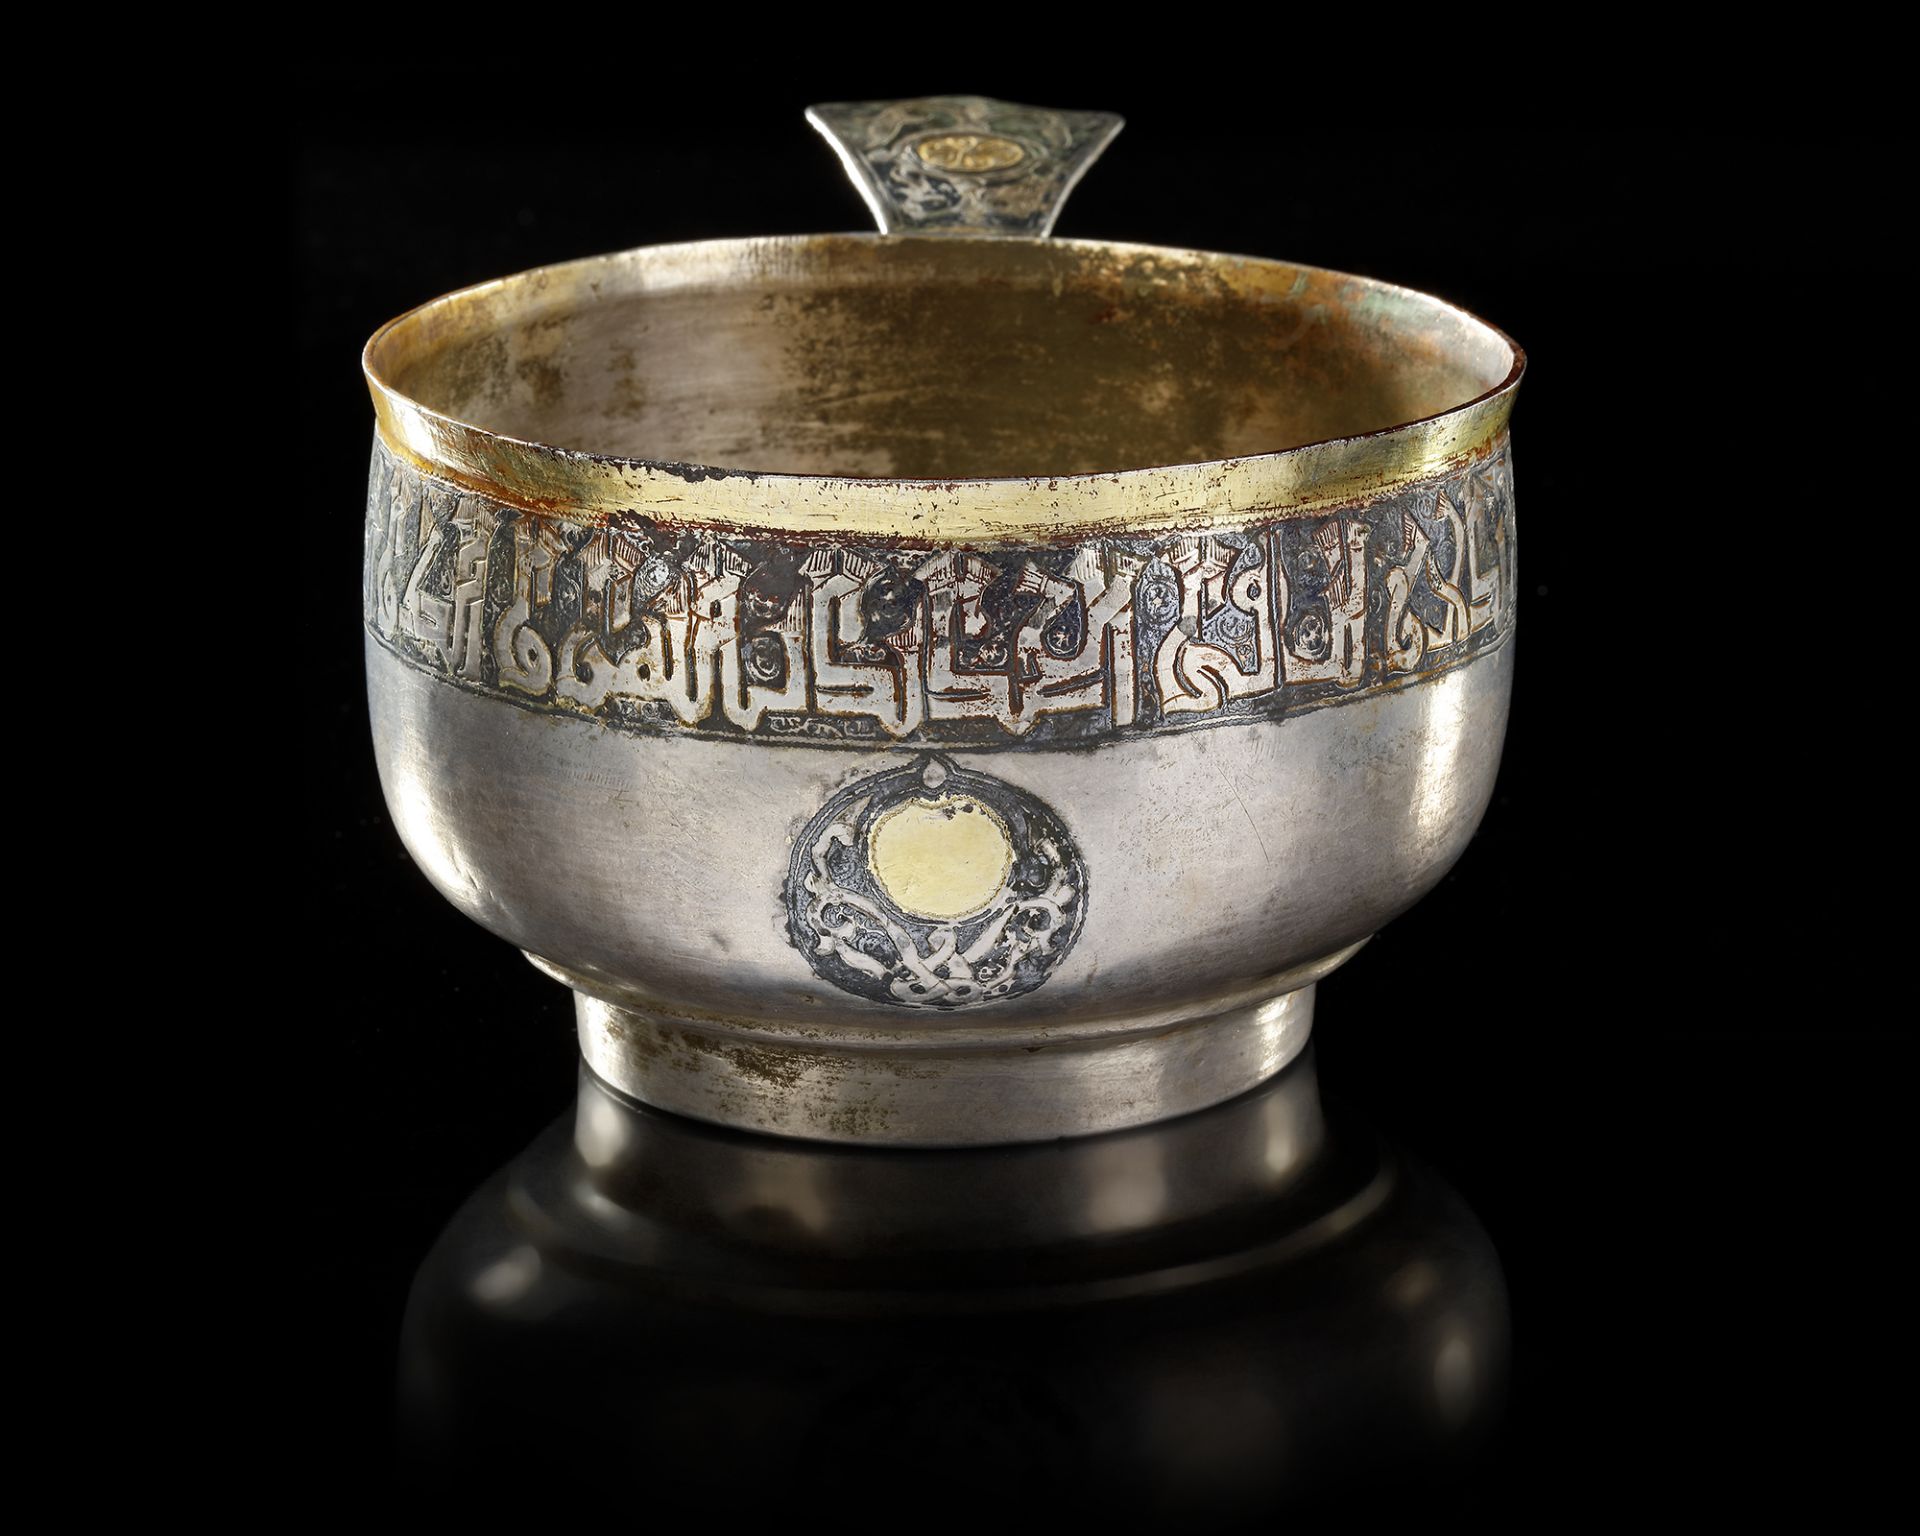 A RARE SILVER AND NIELLOED CUP WITH KUFIC INSCRIPTION, PERSIA OR CENTRAL ASIA, 11TH-12TH CENTURY - Image 15 of 34